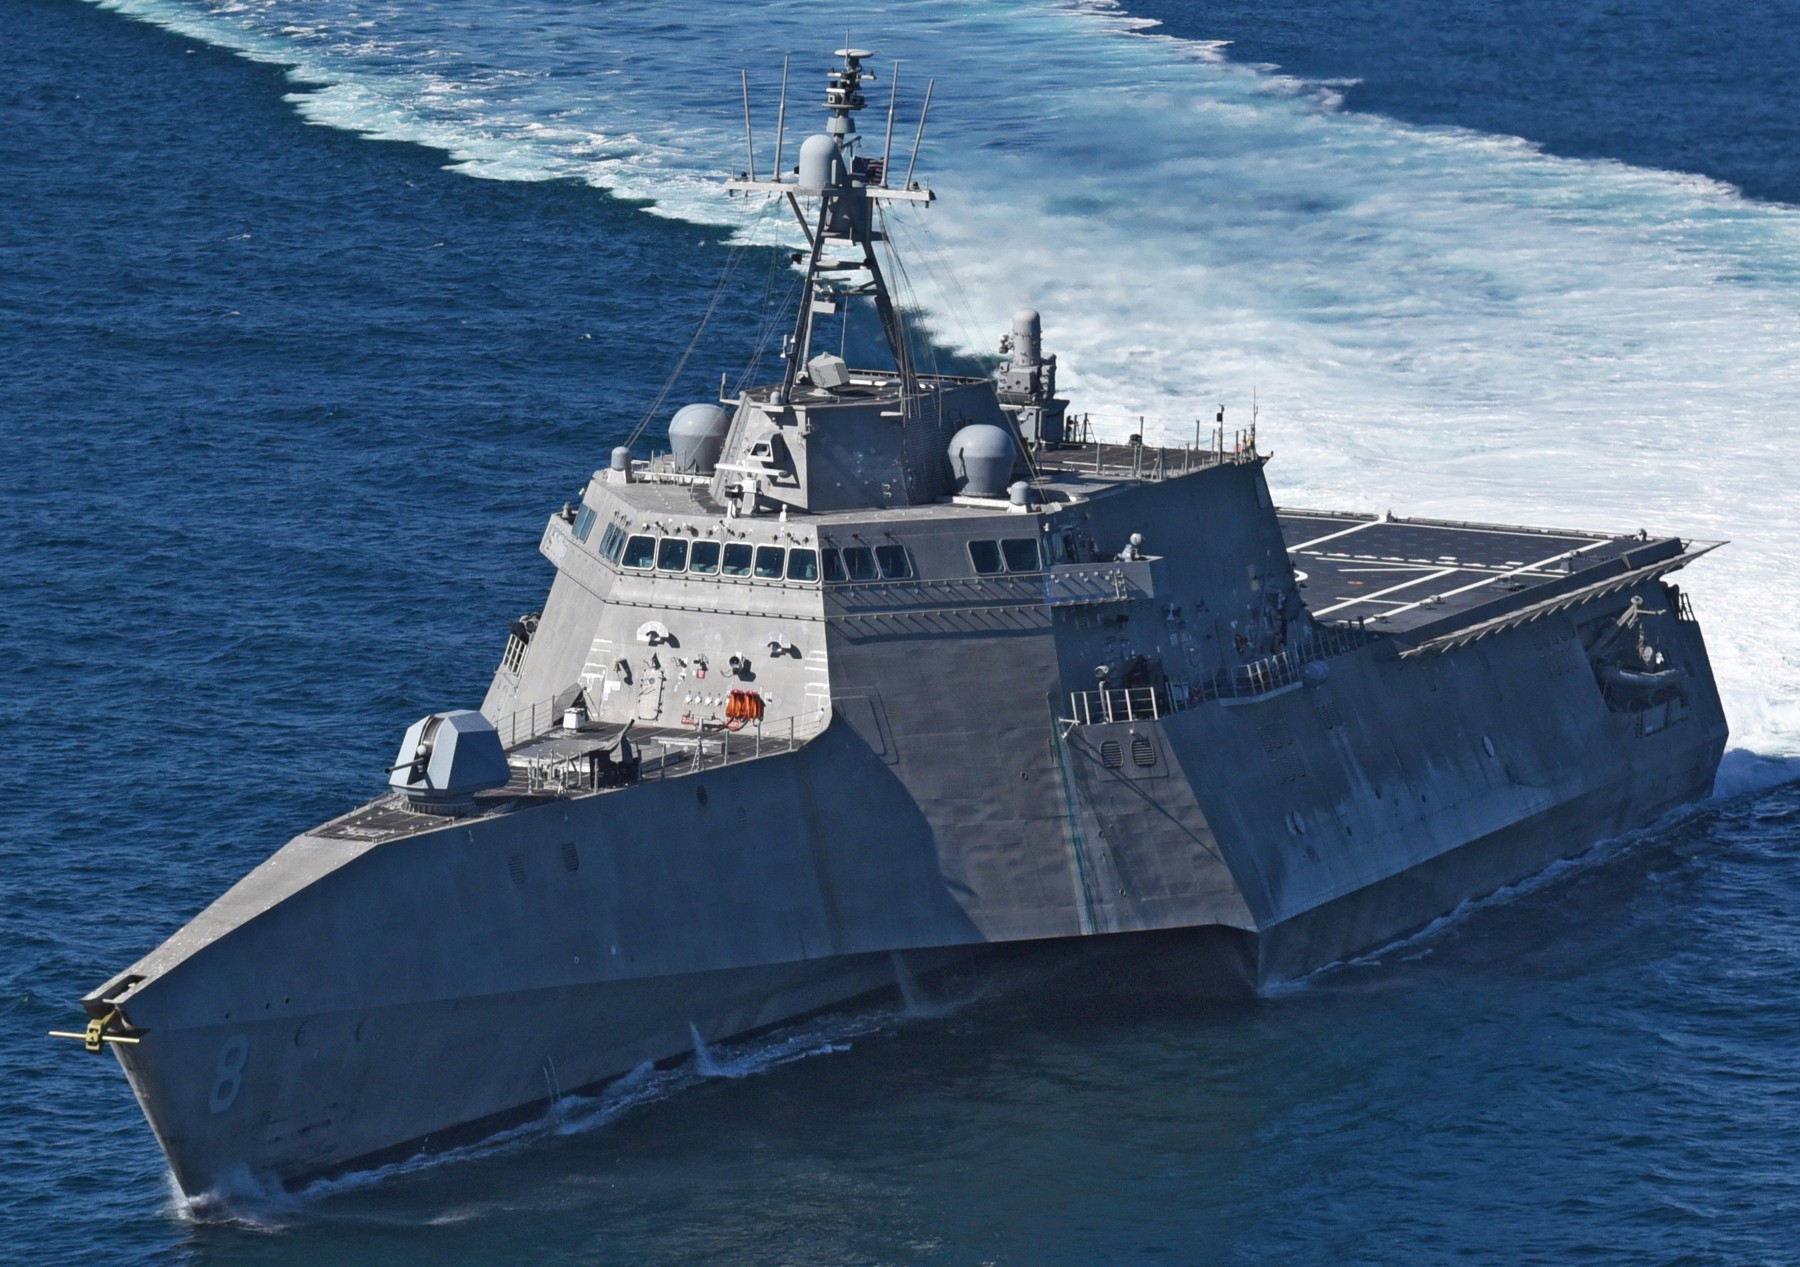 lcs-8 uss montgomery independence class littoral combat ship us navy 51